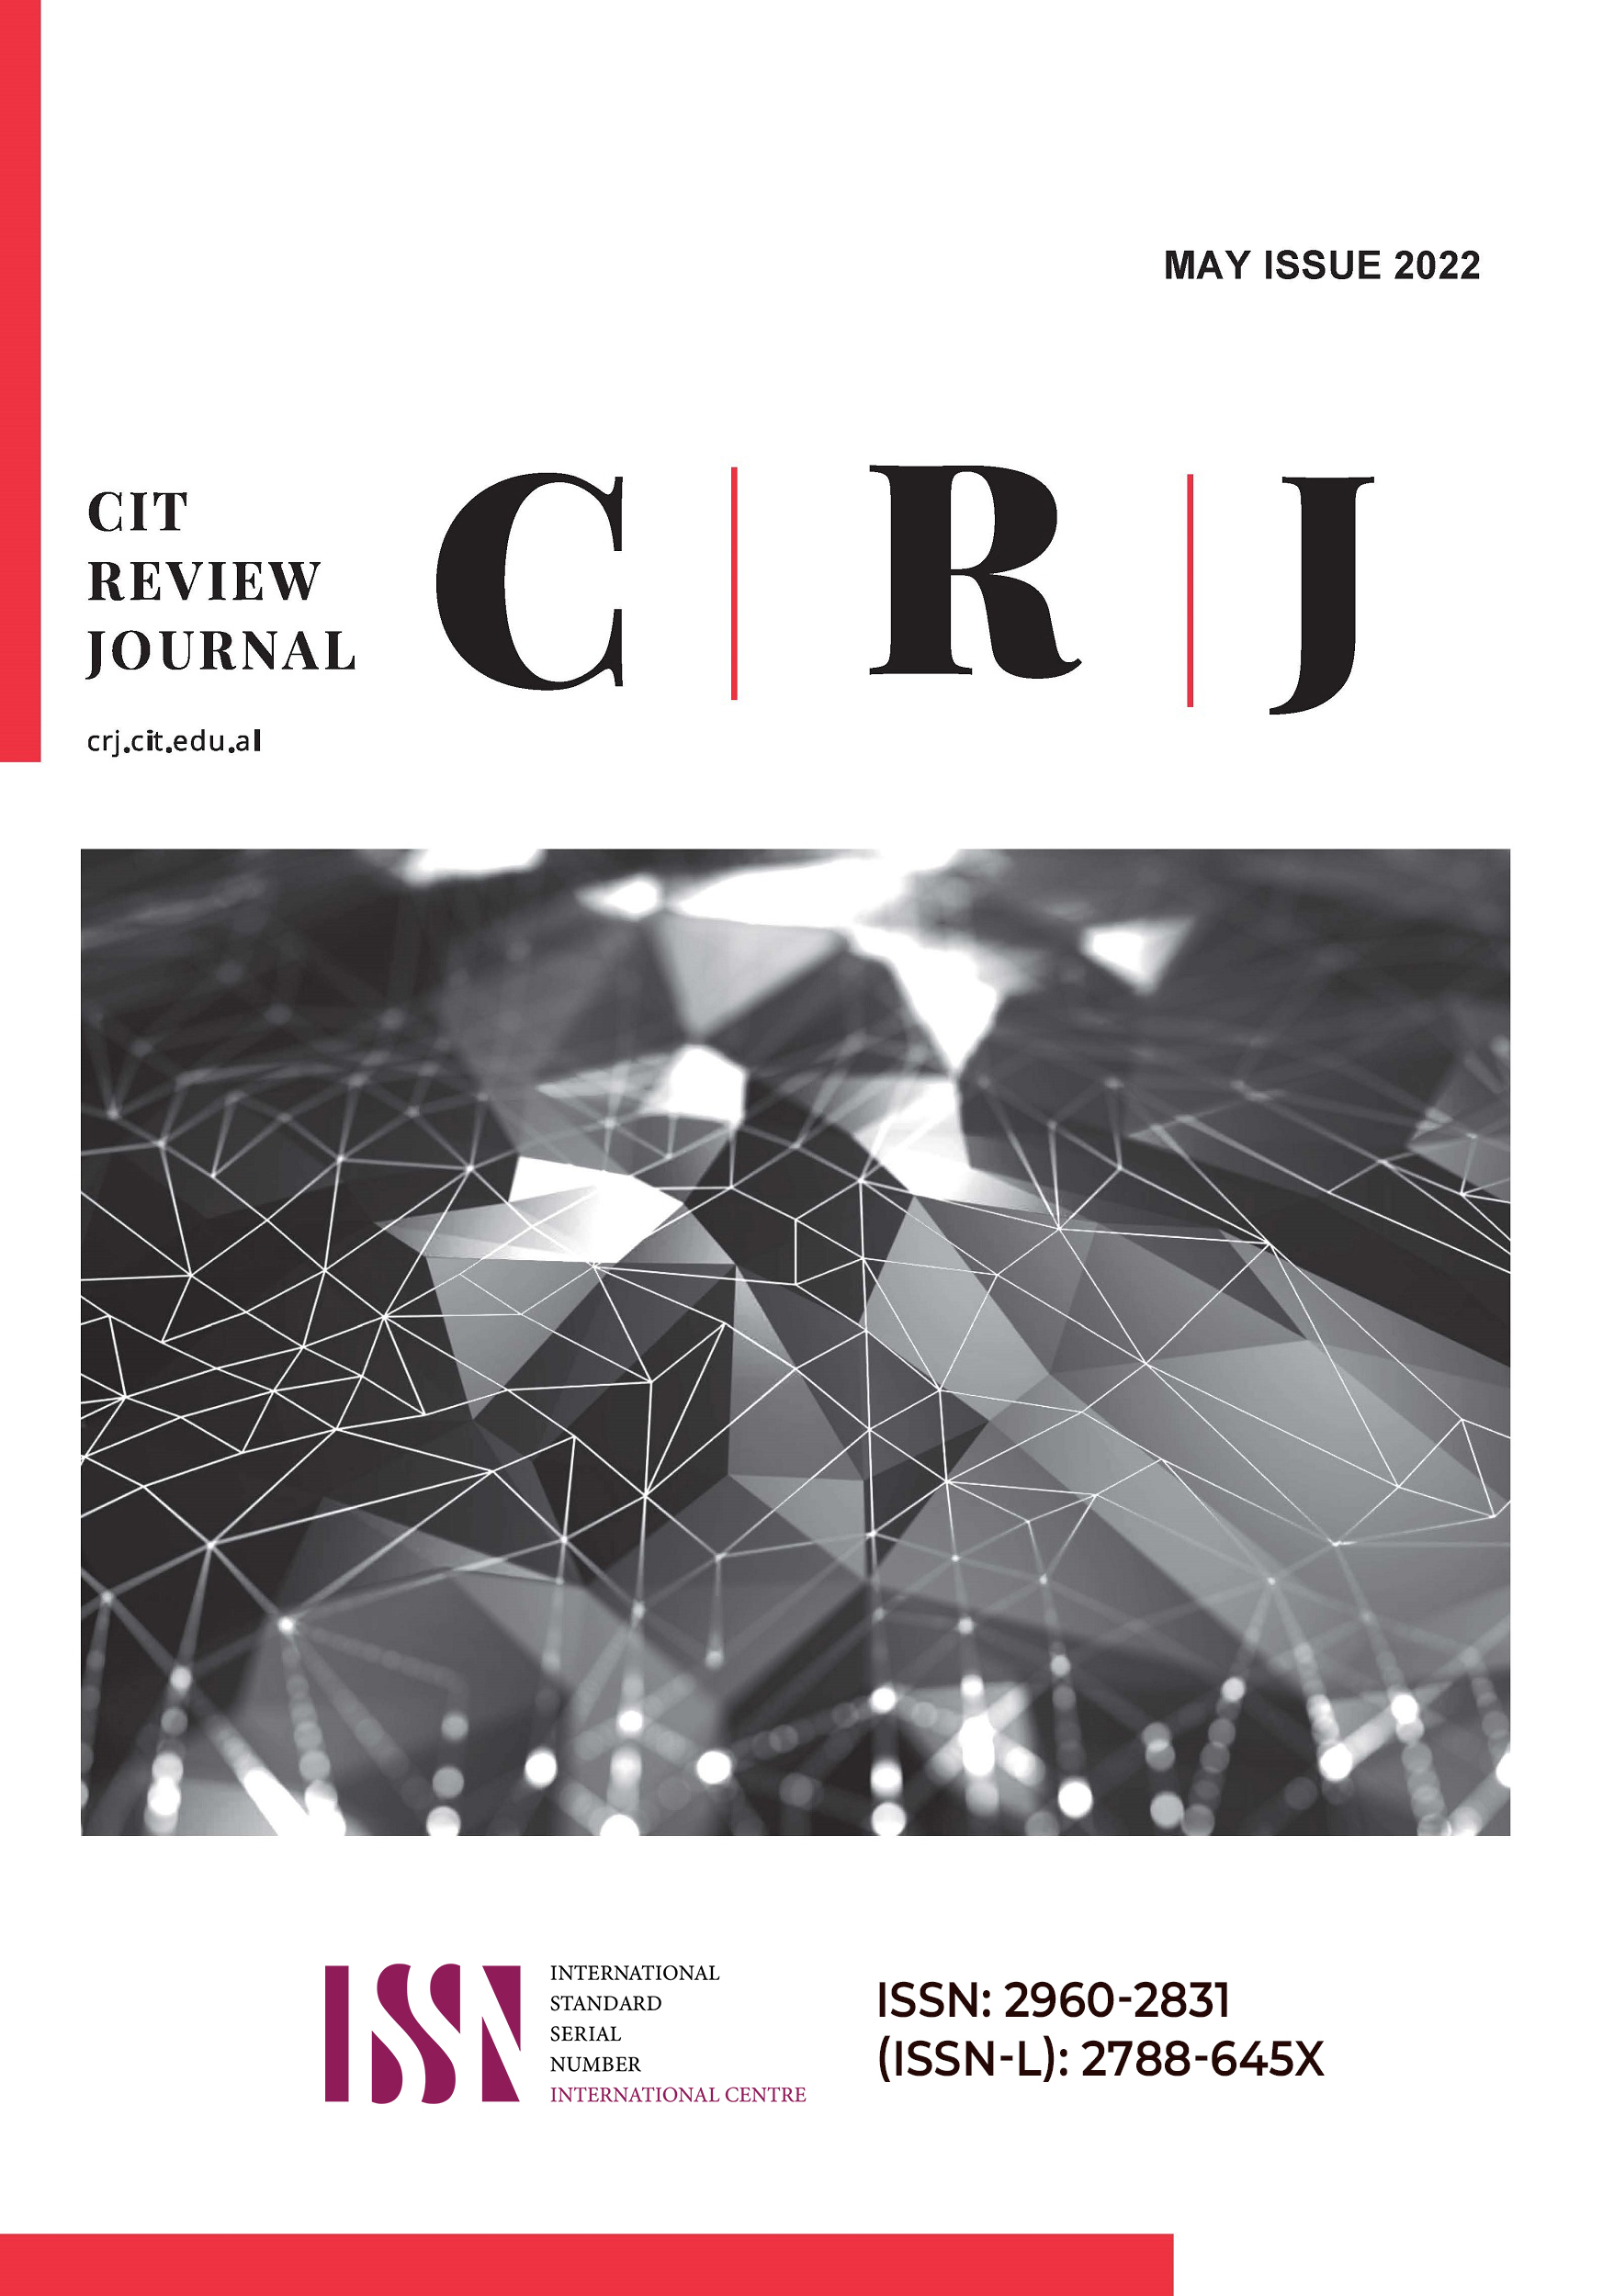 CIT Review Journal May Issue 2022